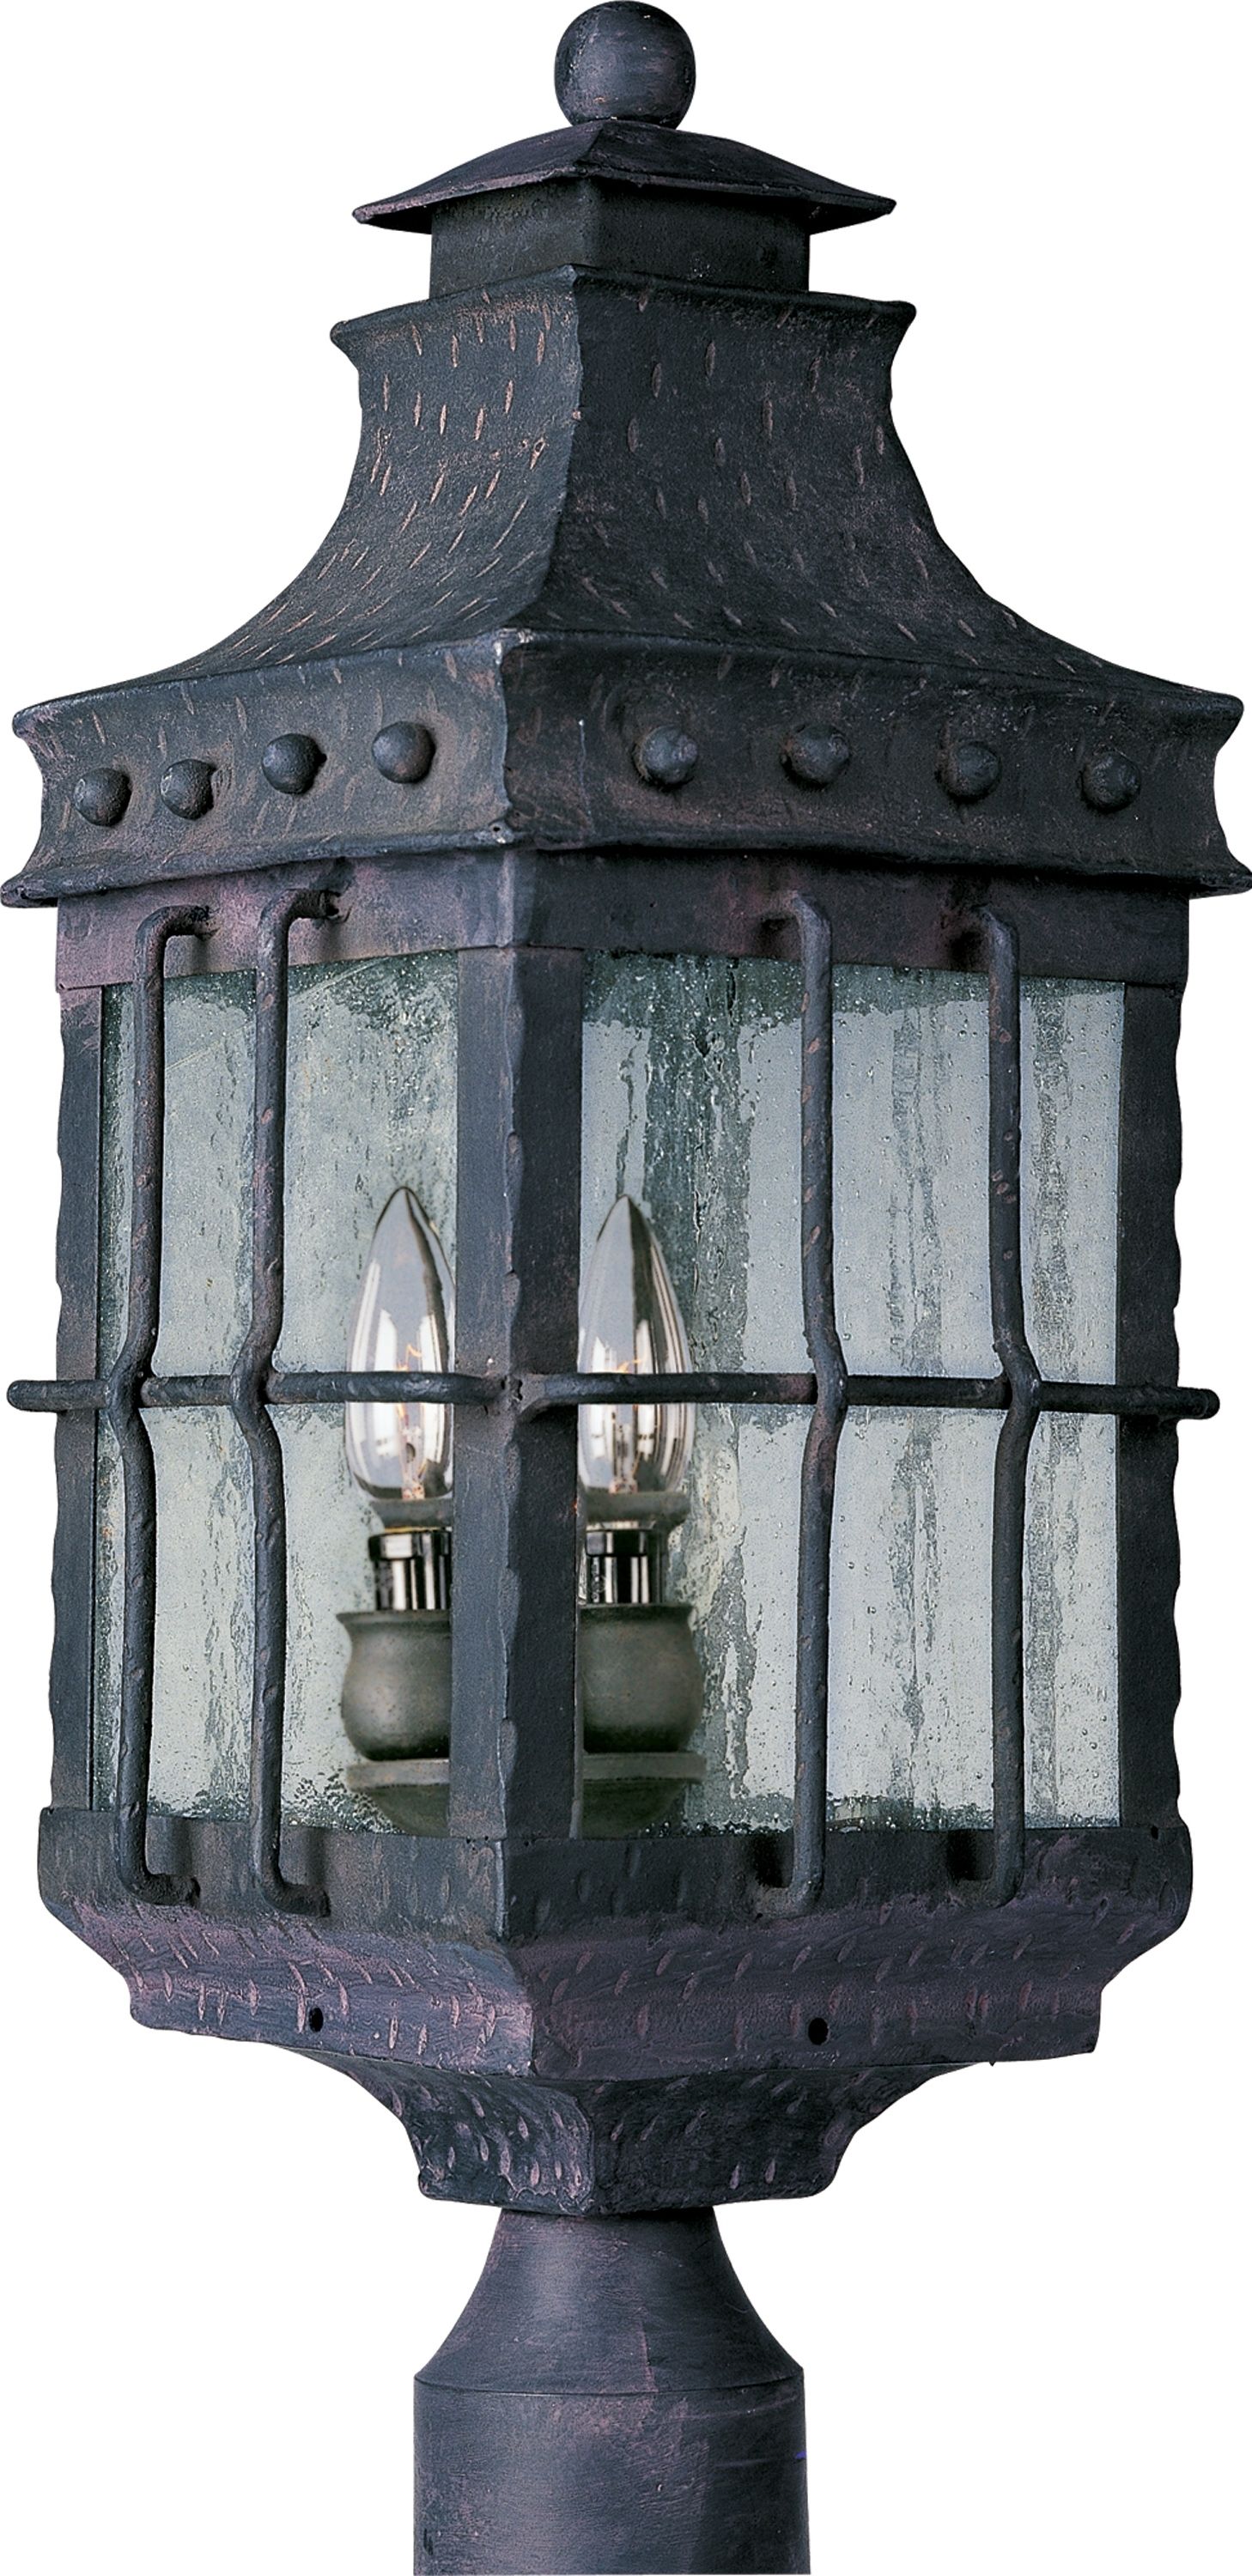 Most Current Nantucket Outdoor Lanterns With Regard To Nantucket 3 Light Outdoor Pole/post Lantern 30080cdcf (View 19 of 20)